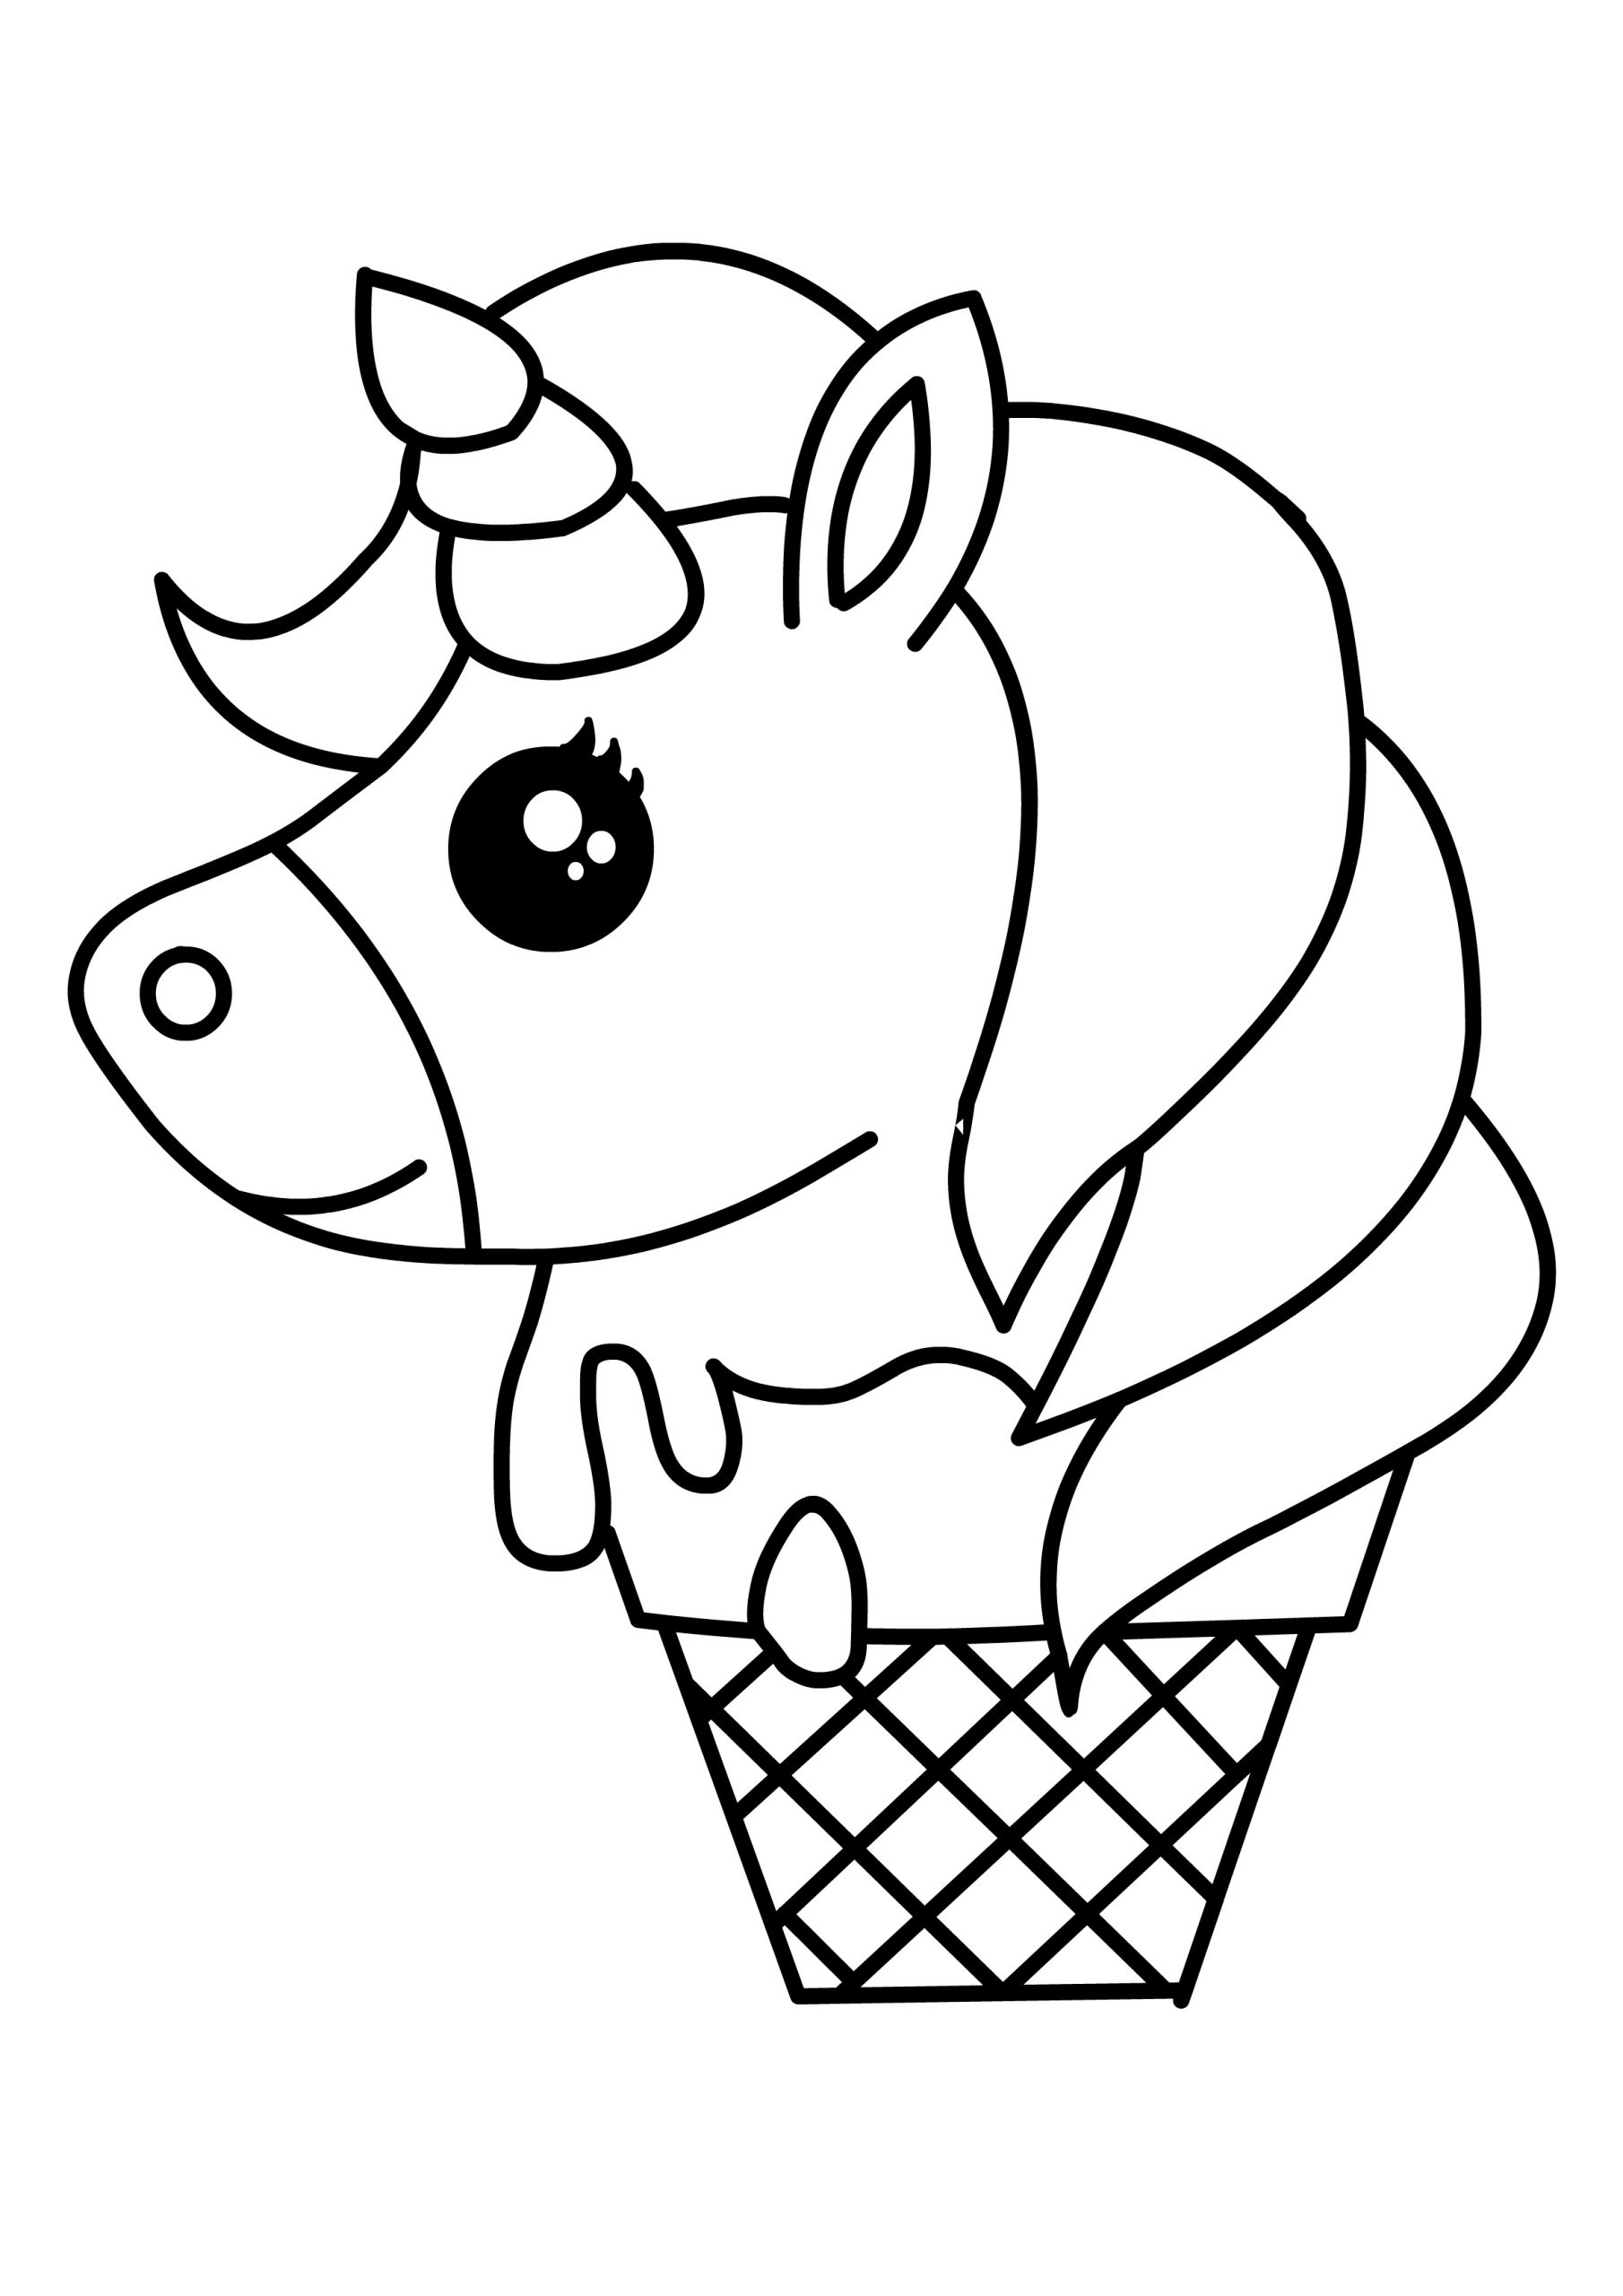 Coloring Page Unicorn Ice Cream. Coloring Page For Kids - Coloring Home